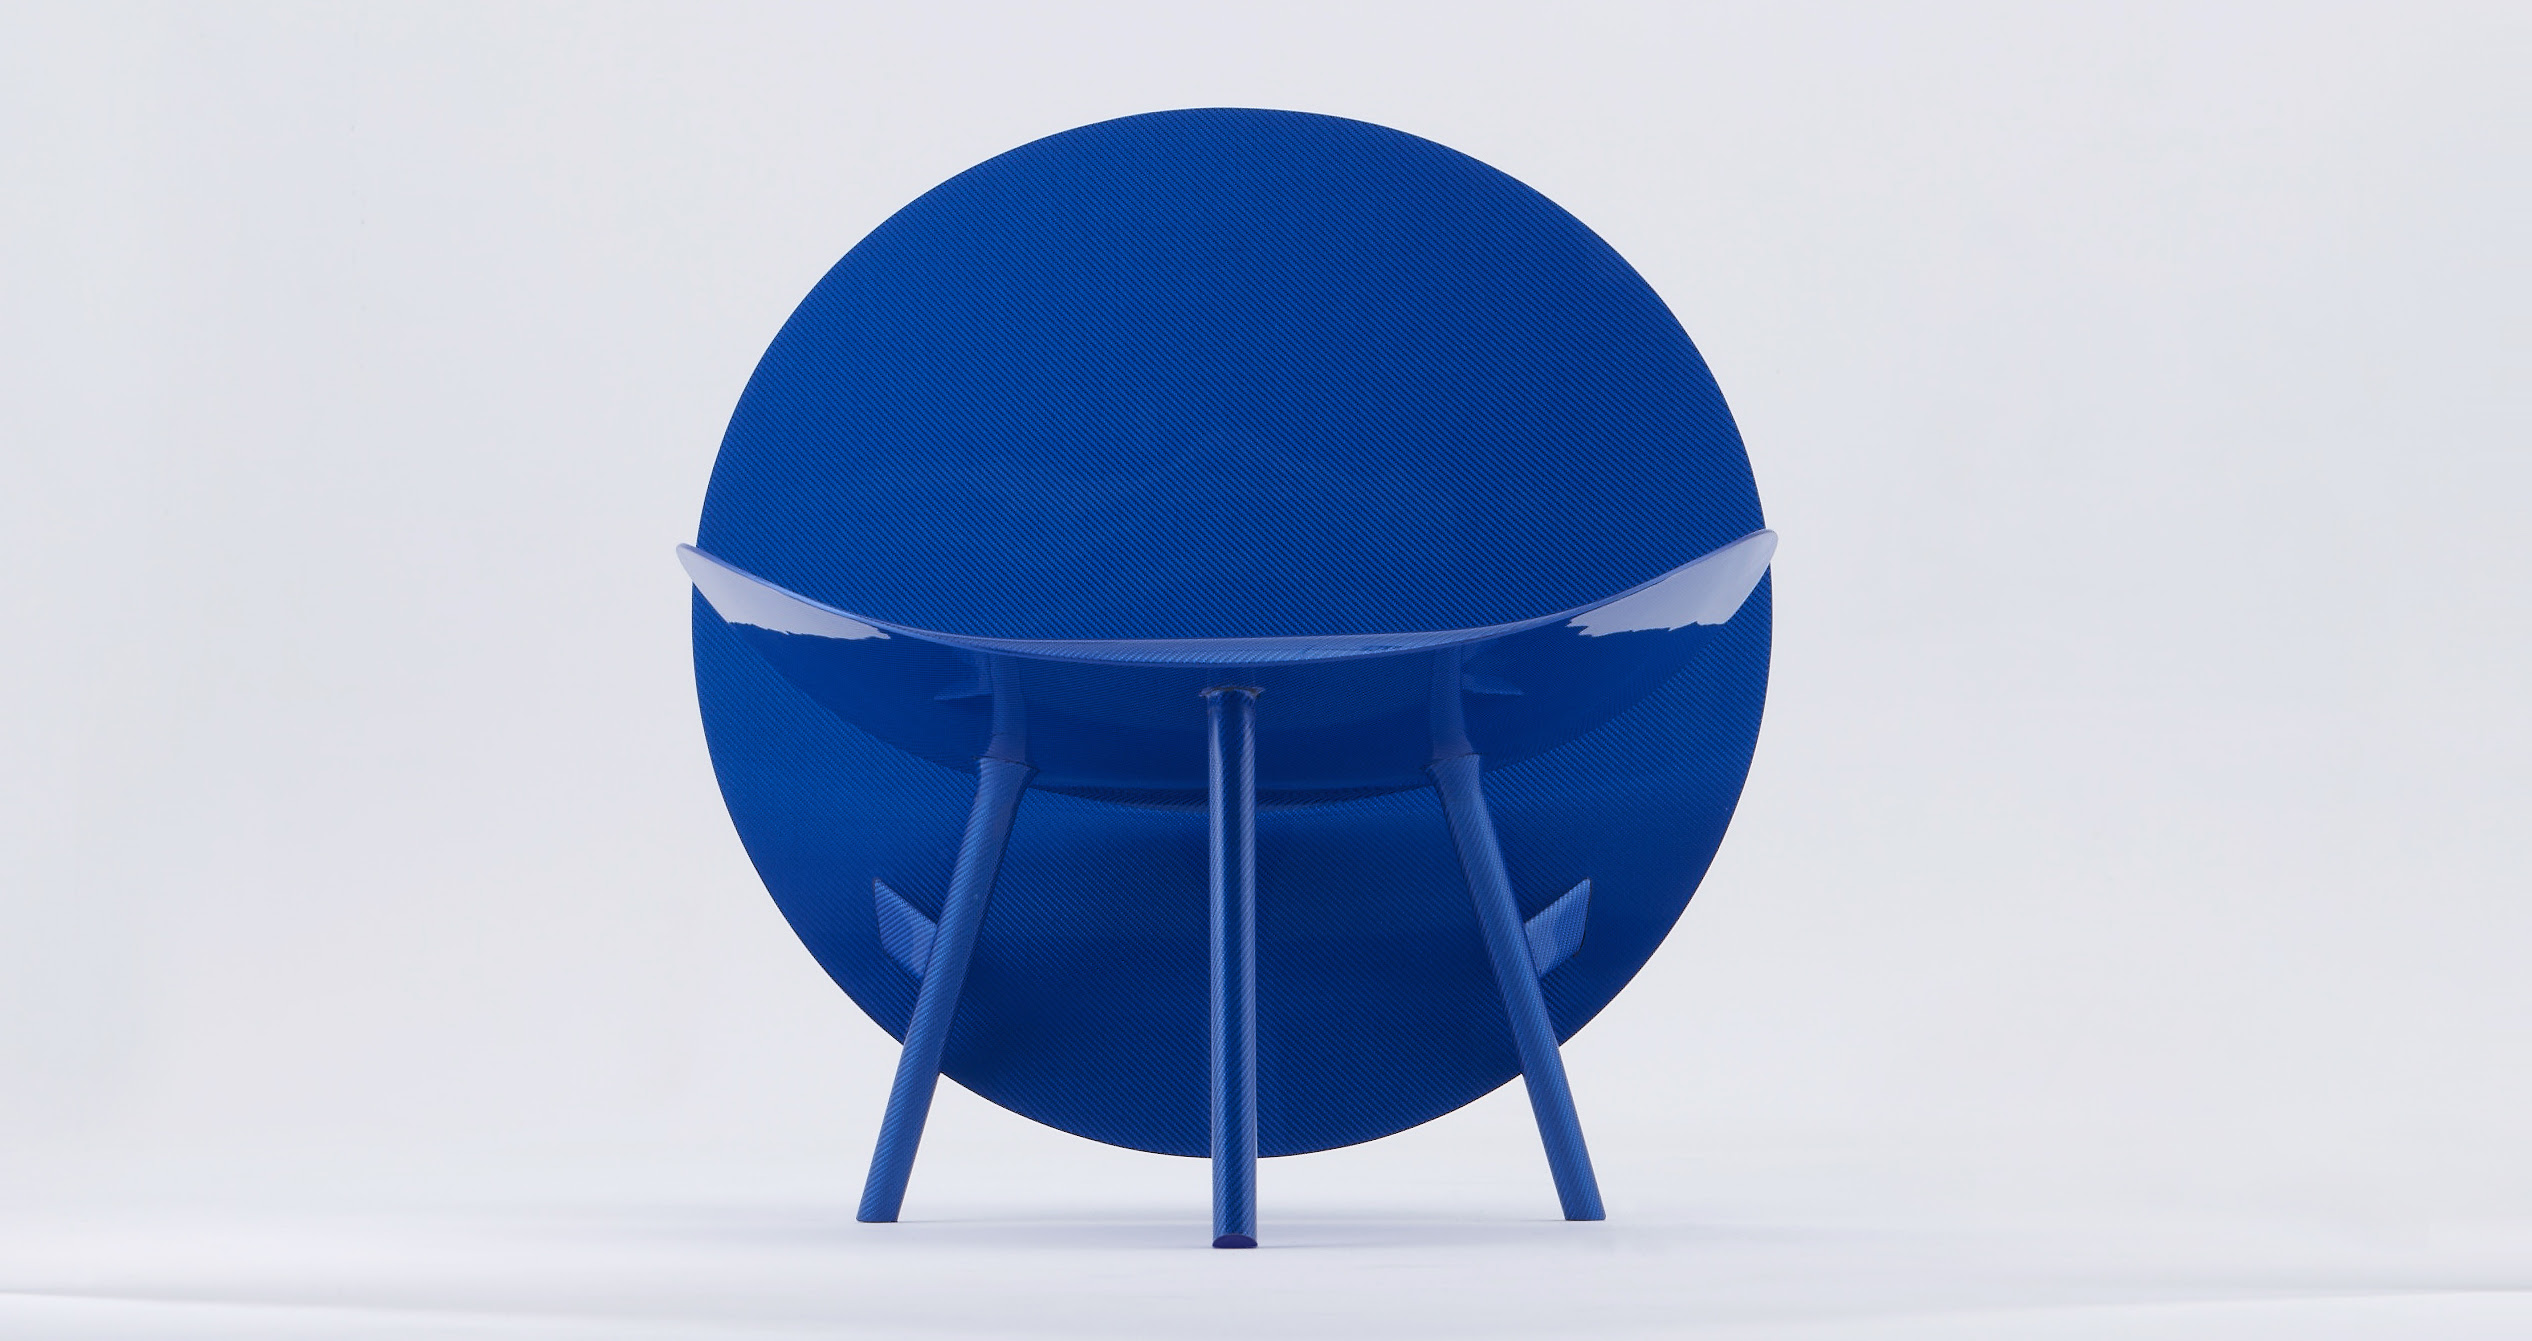 The idea behind the Halo chair was to design an object that could best define and present the Hypetex material. © Hypetex